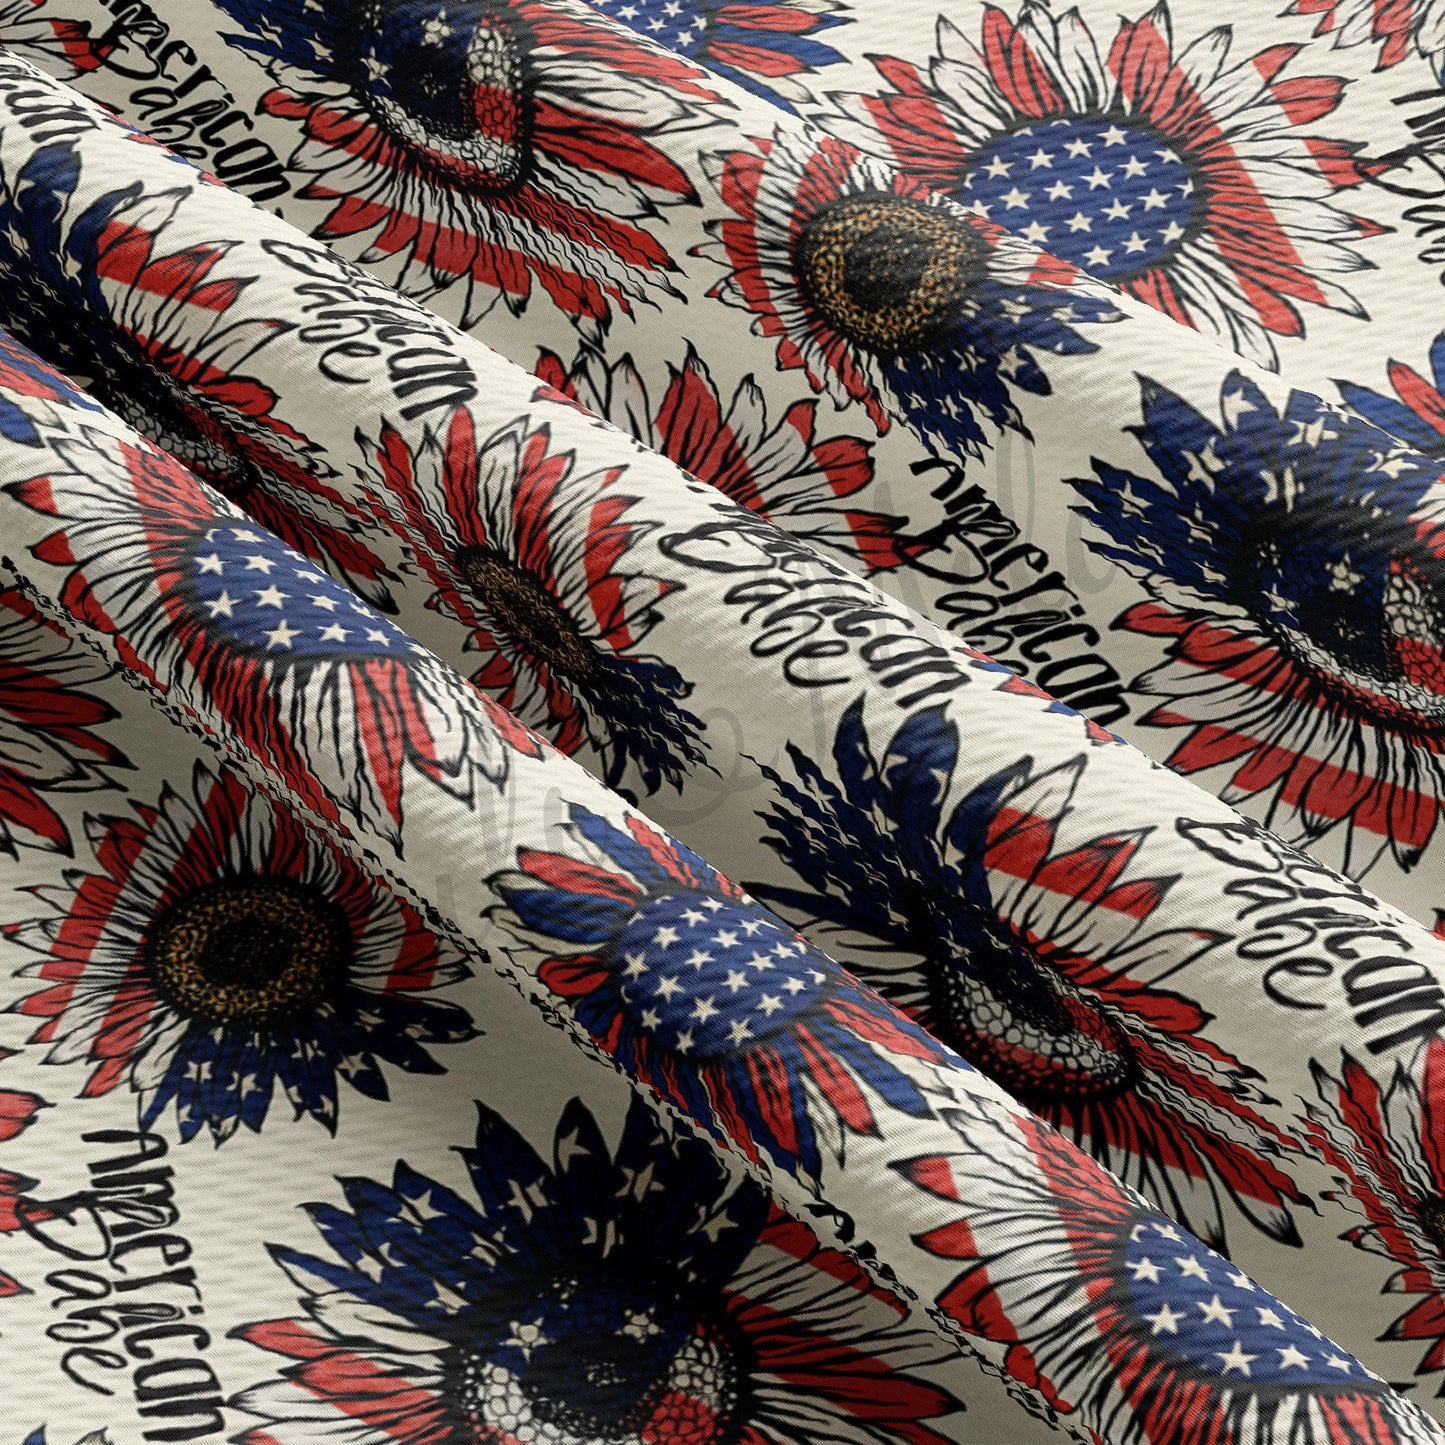 Patriotic 4th of July  Bullet Textured Fabric AA1545